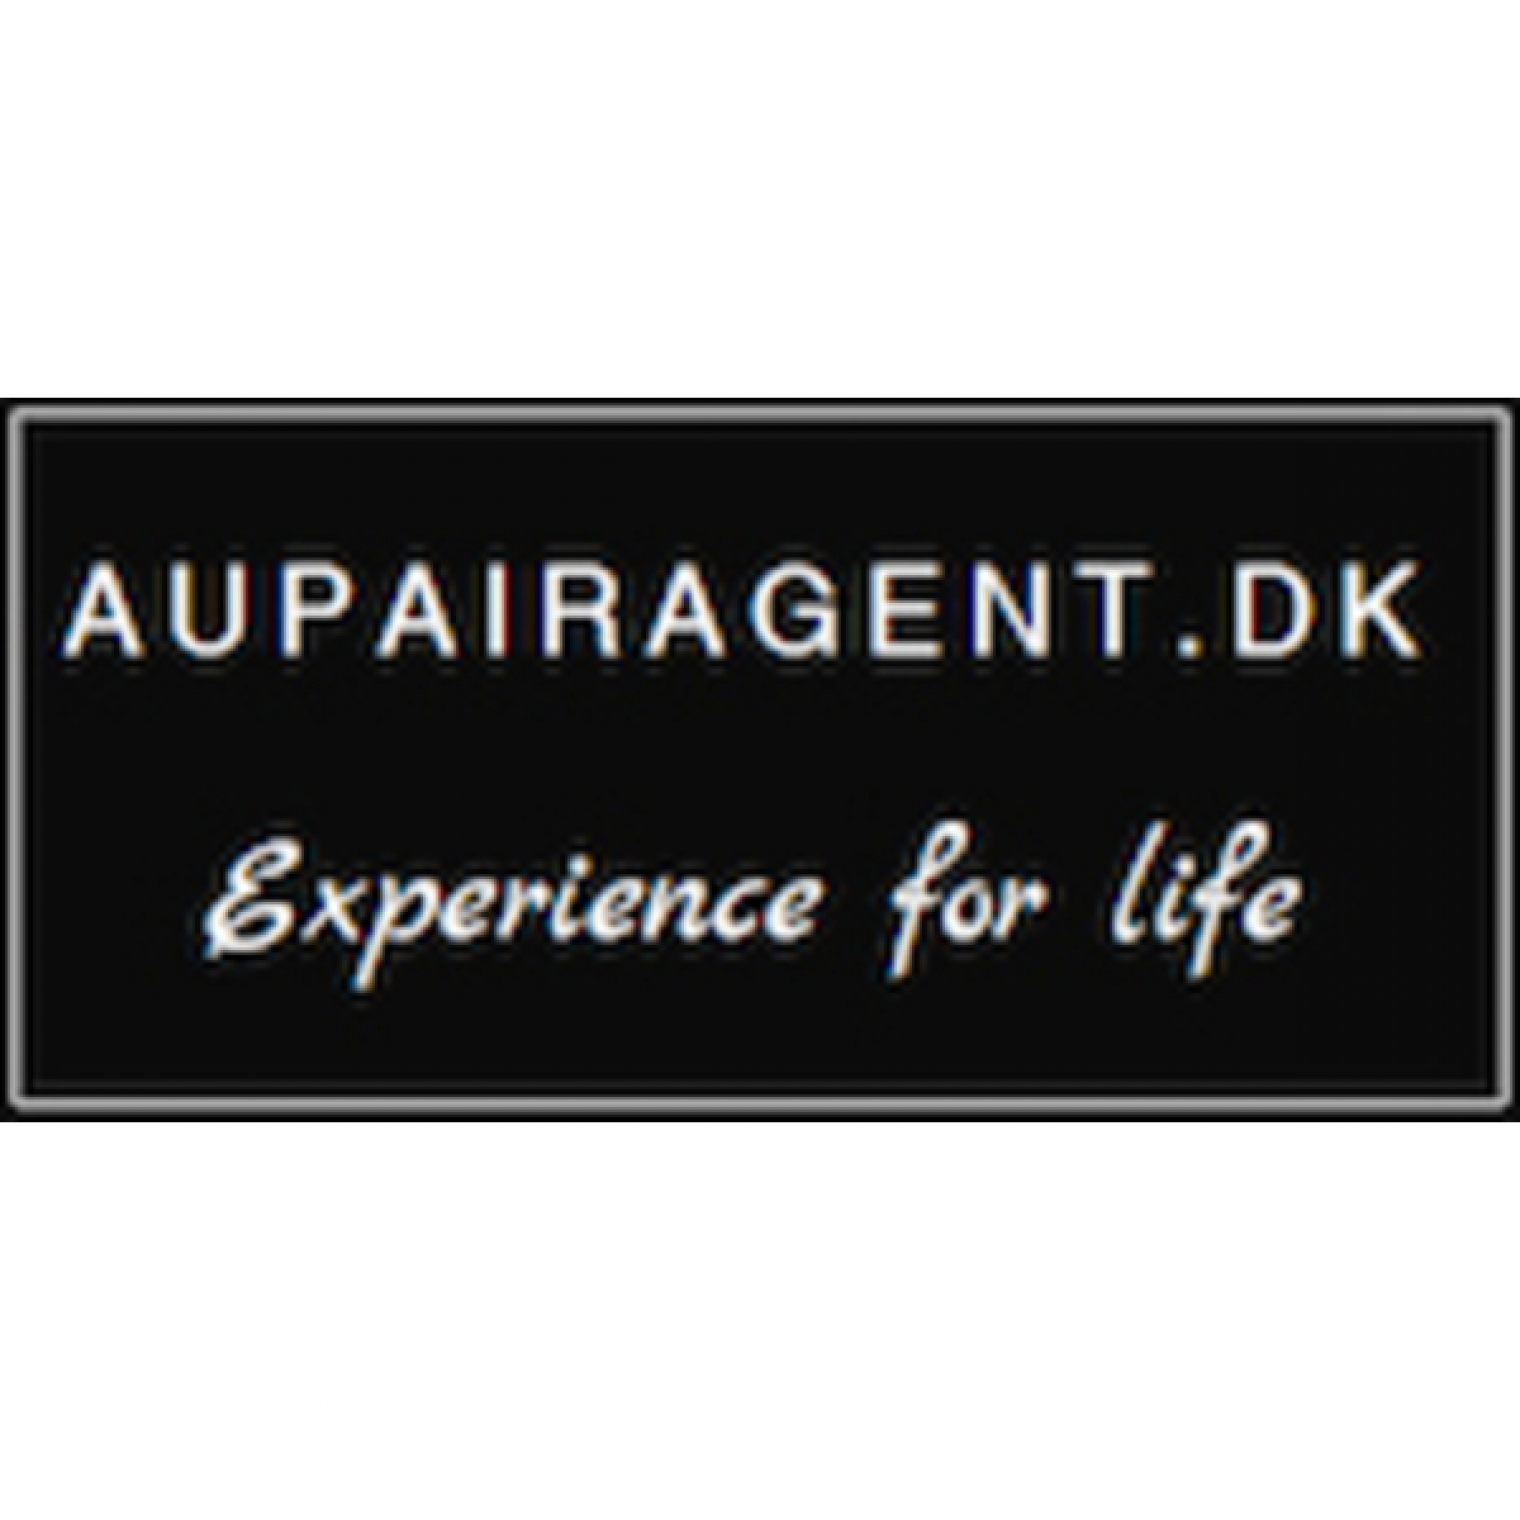 We welcome our new Danish Affiliate Member Aupairagent.dk